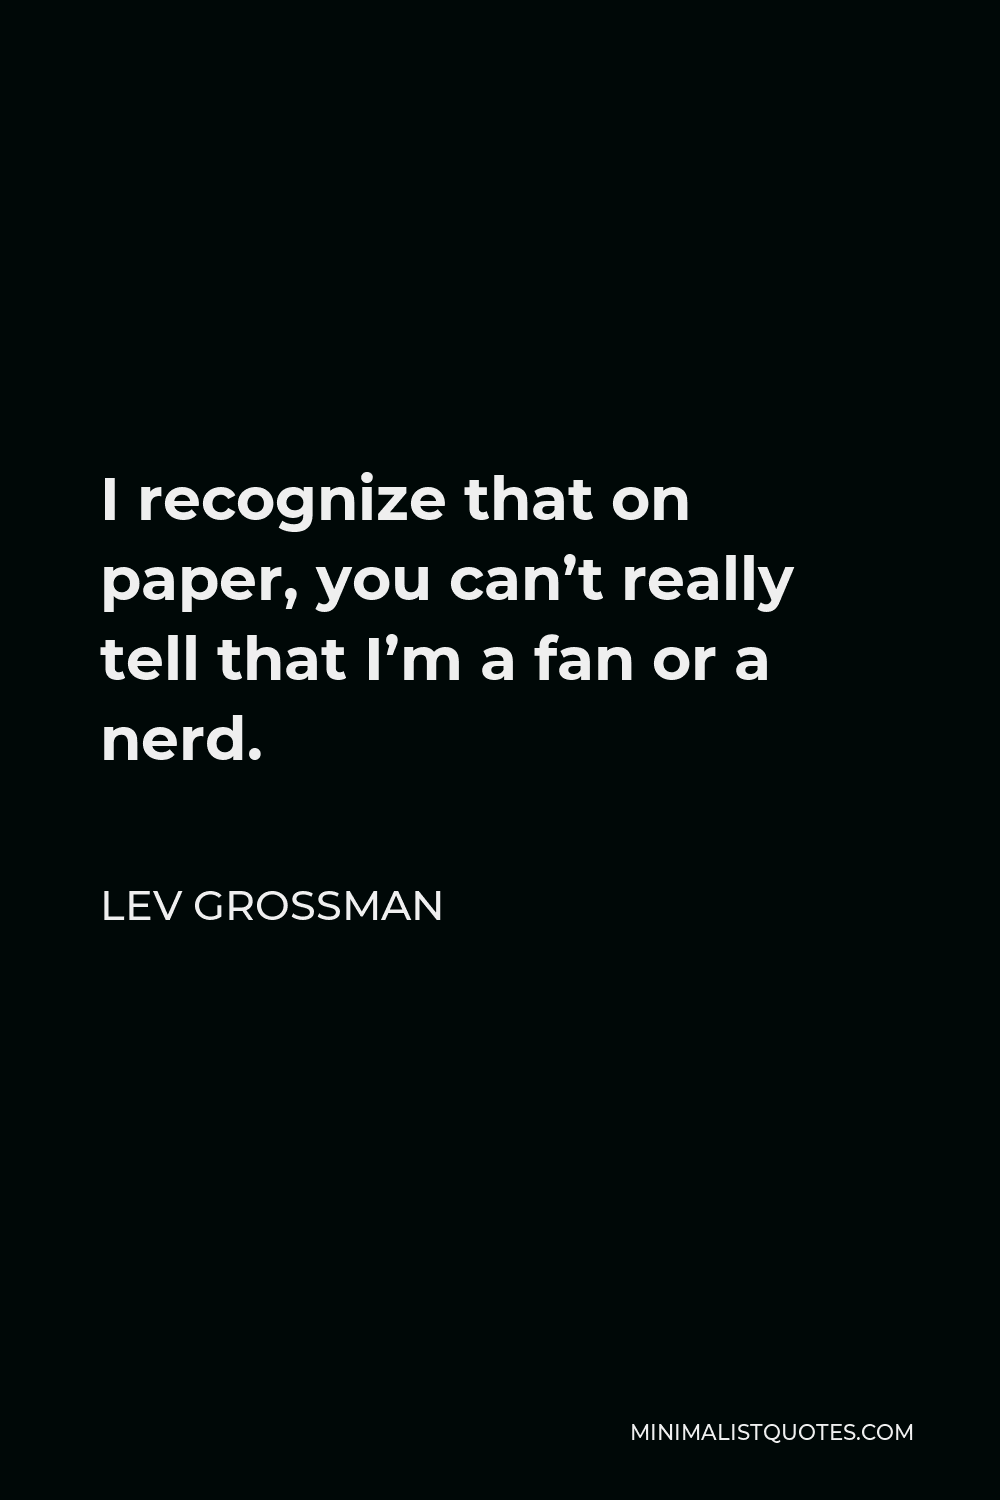 Lev Grossman Quote - I recognize that on paper, you can’t really tell that I’m a fan or a nerd.